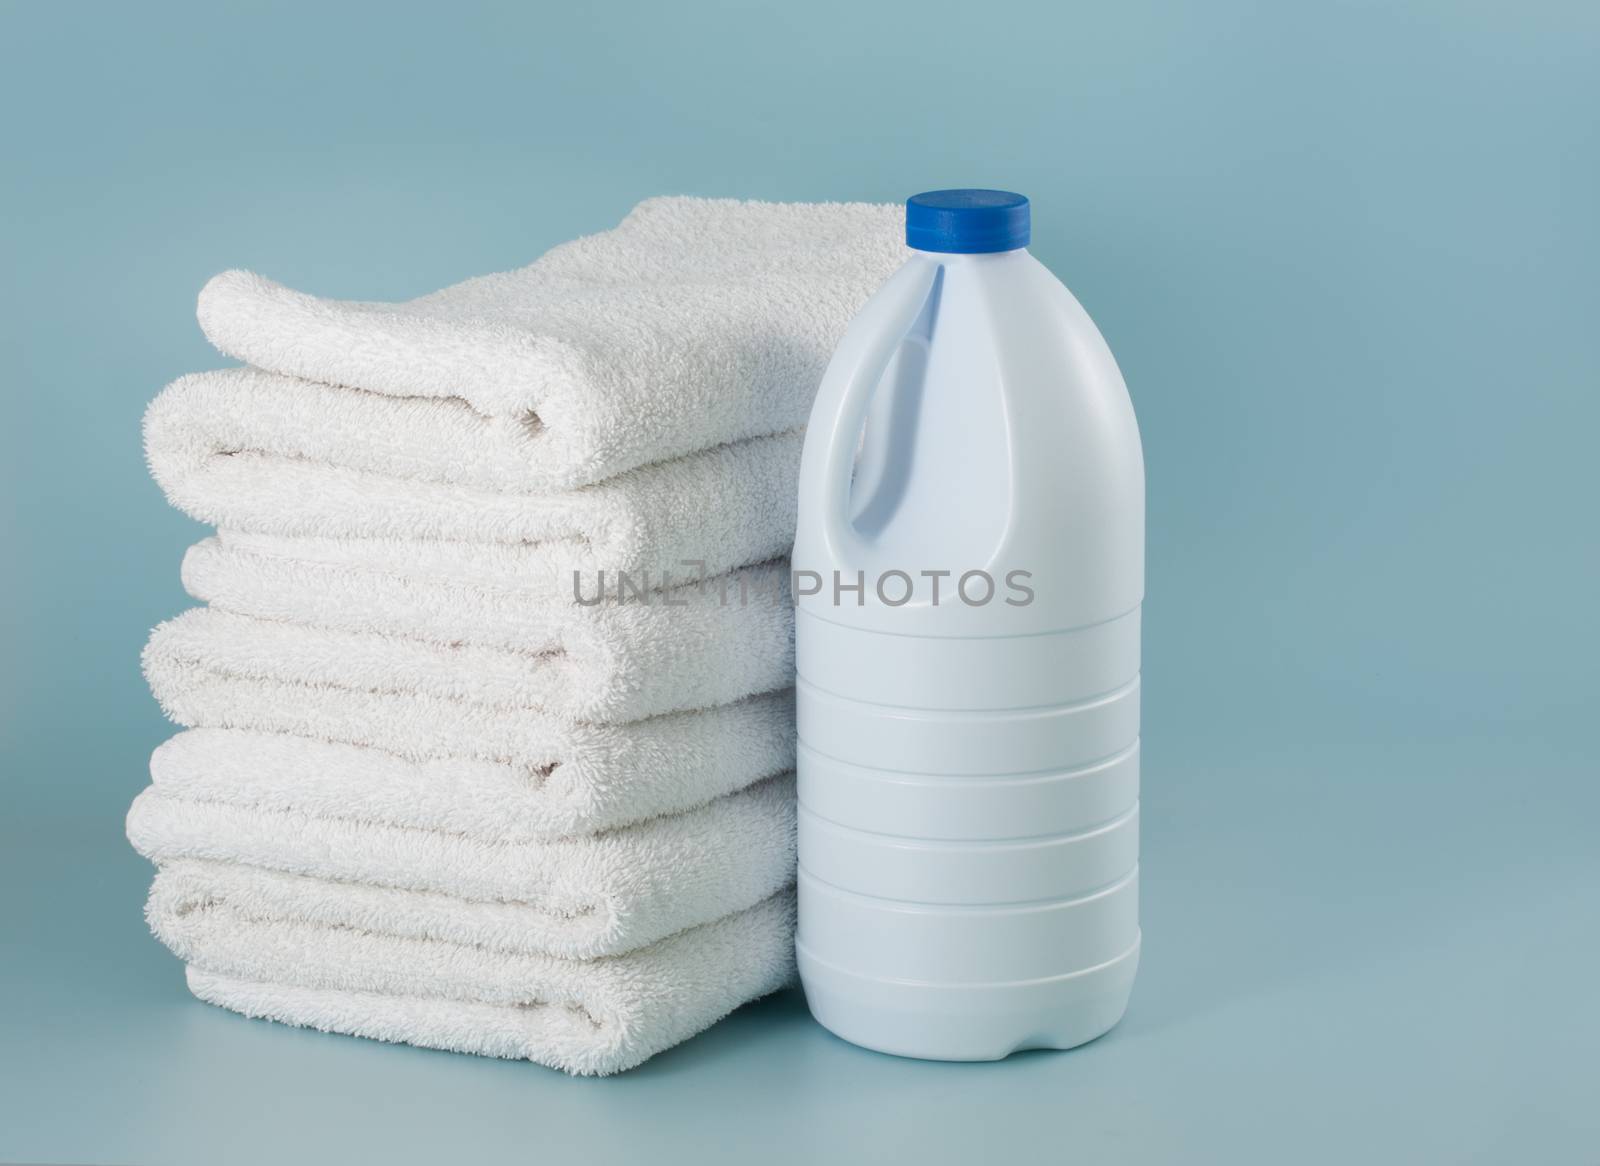 Laundry white bleach bottle place beside stack of bath towel